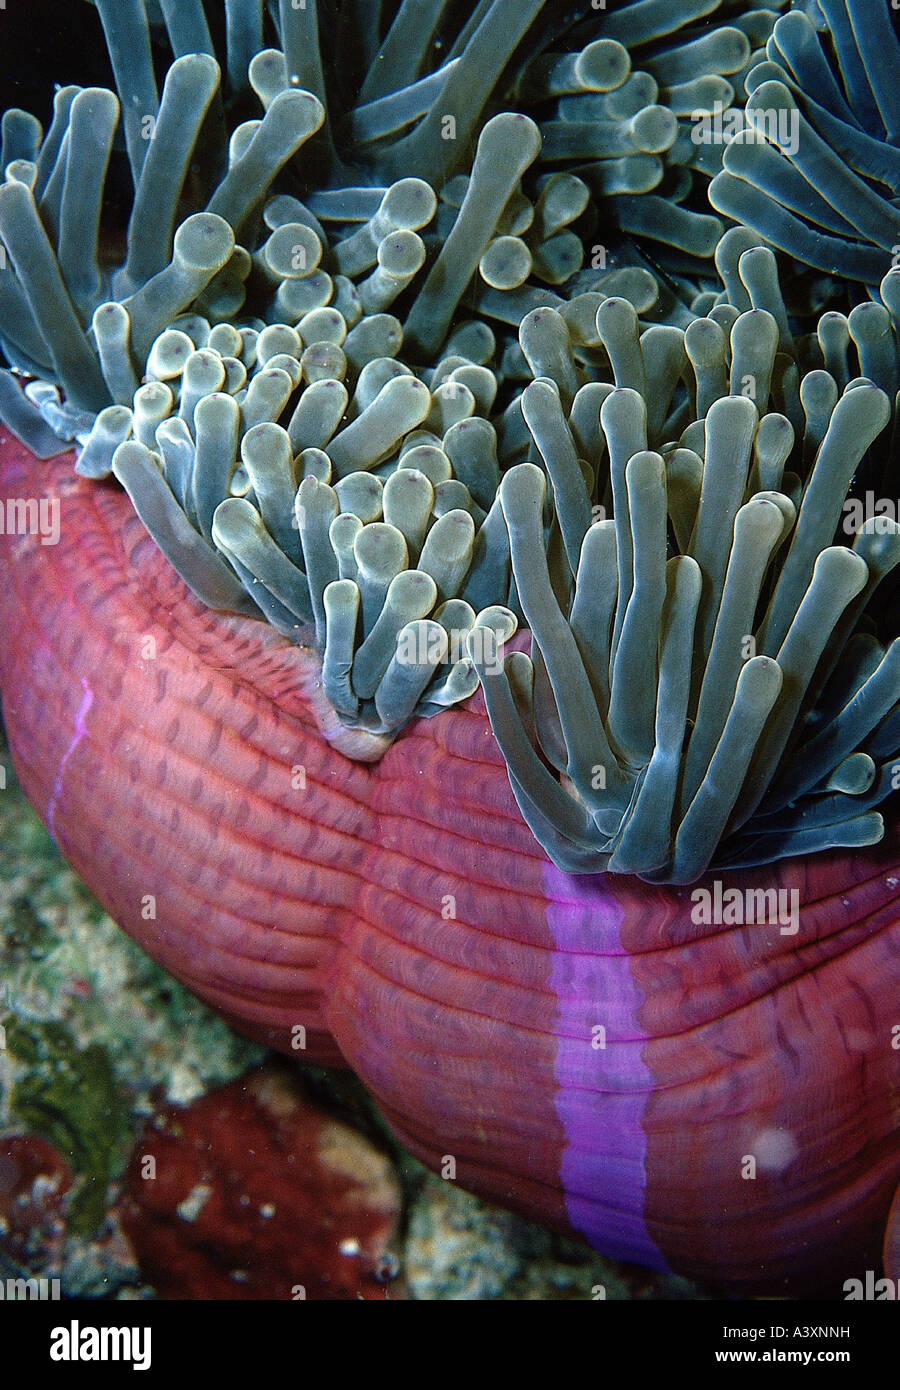 zoology / animals, cnidaria, Magnificent Sea Anemone, (Heteractis magnifica), detail: green tentacle on purple base, close-up, M Stock Photo